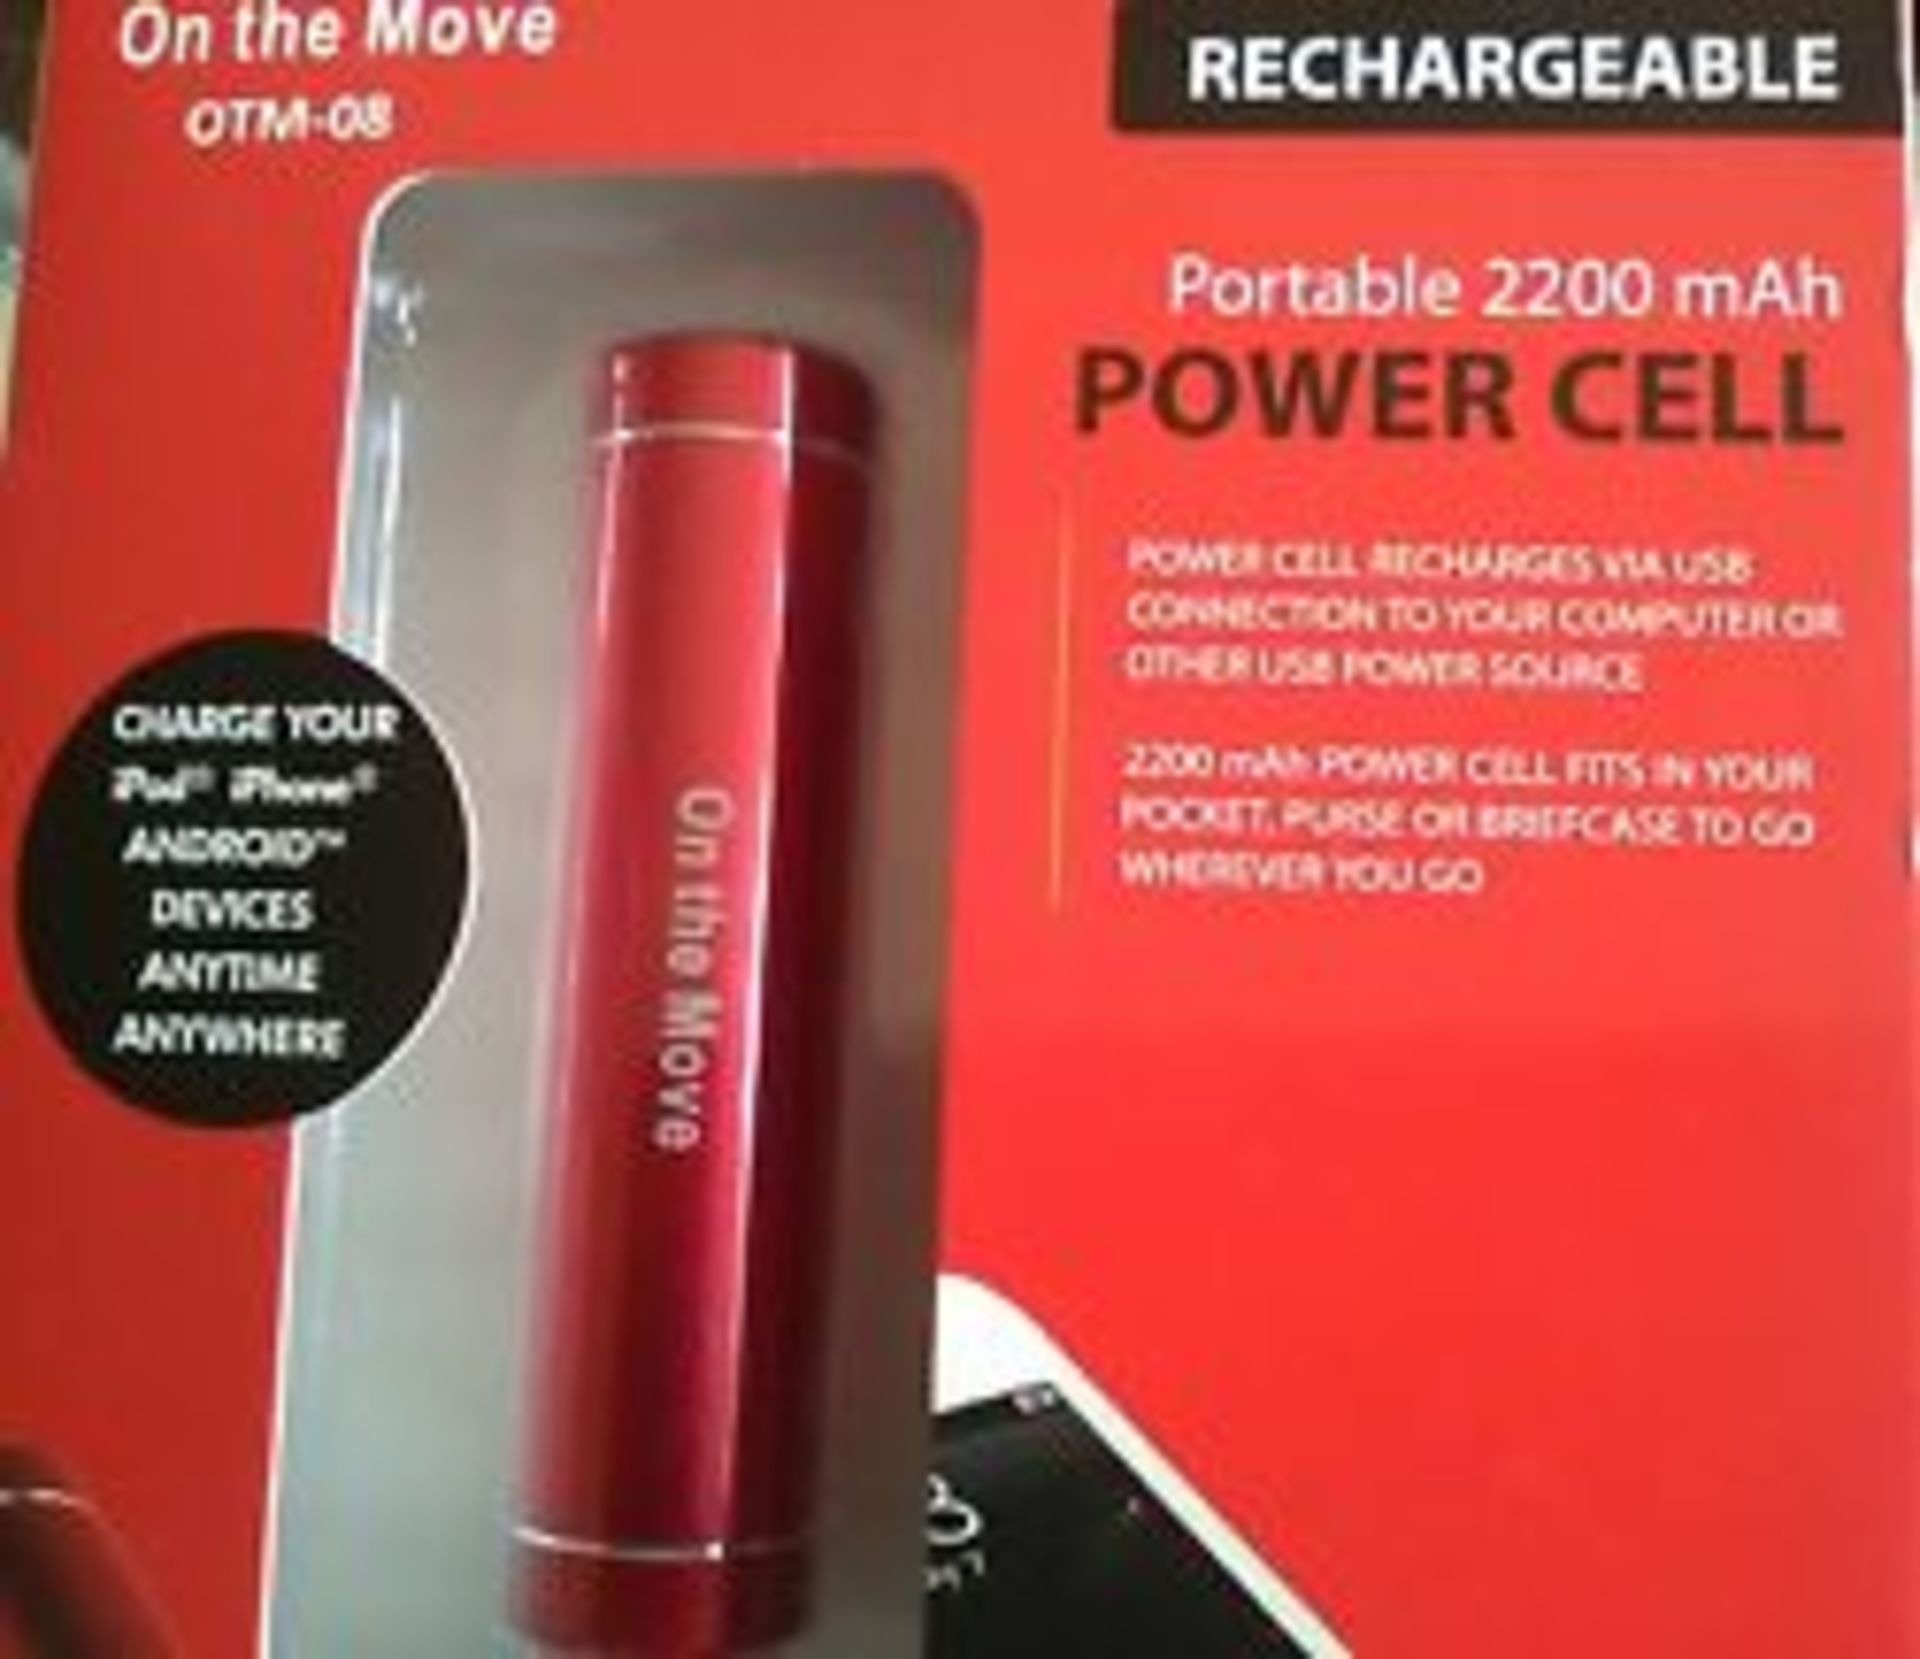 V *TRADE QTY* Brand New On The Move Portable 2200mAh Power Cell Rechargeable Power Bank - Incldues - Image 2 of 2